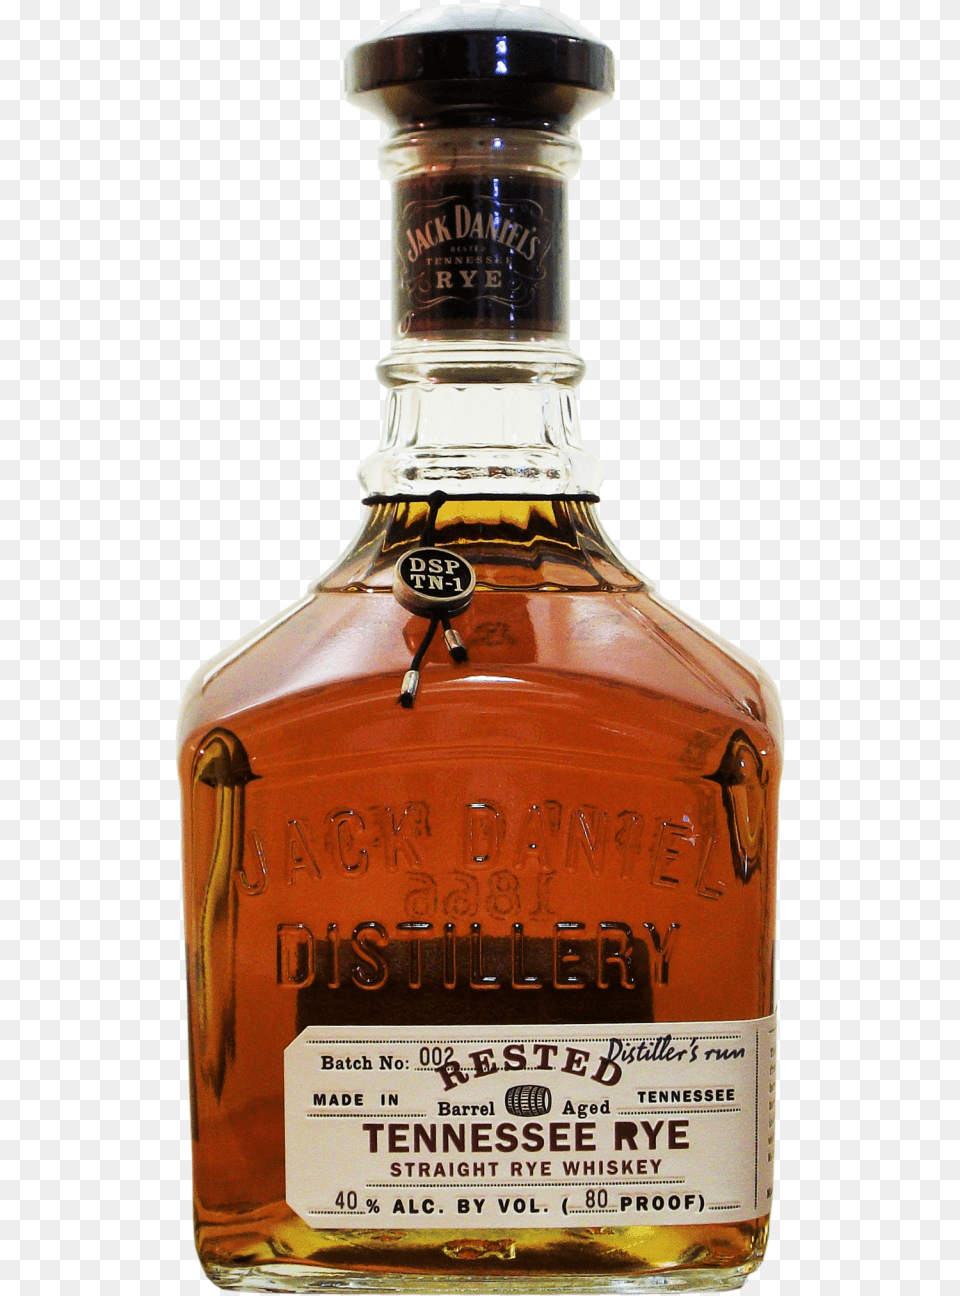 Jack Daniel S Rested Rye Tennessee Straight Rye Whiskey Blenders Pride, Alcohol, Beverage, Liquor, Whisky Free Transparent Png